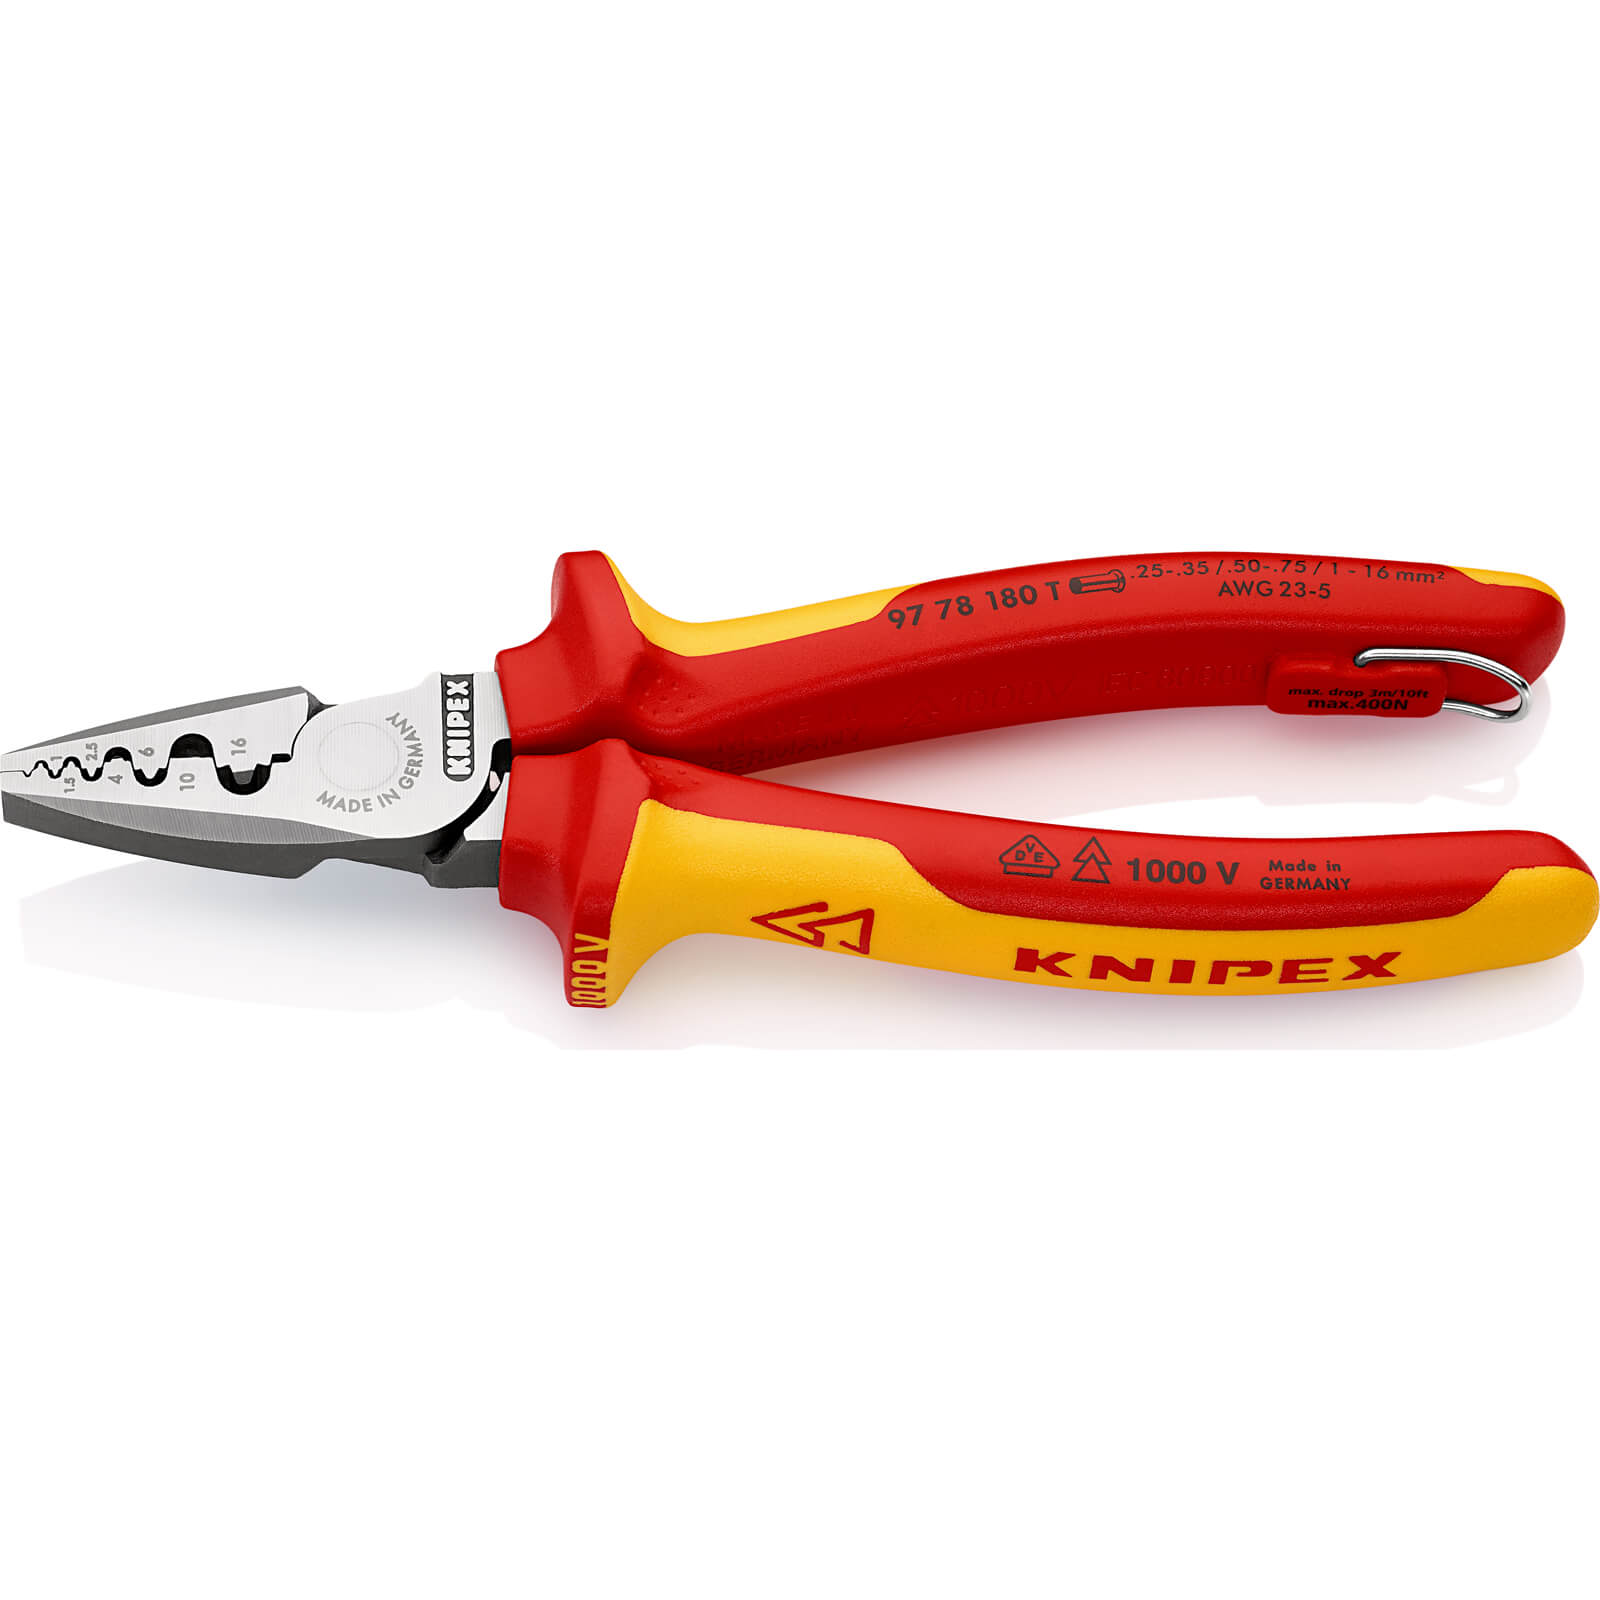 Photo of Knipex 97 78 Vde Insulated Tethered Crimping Pliers